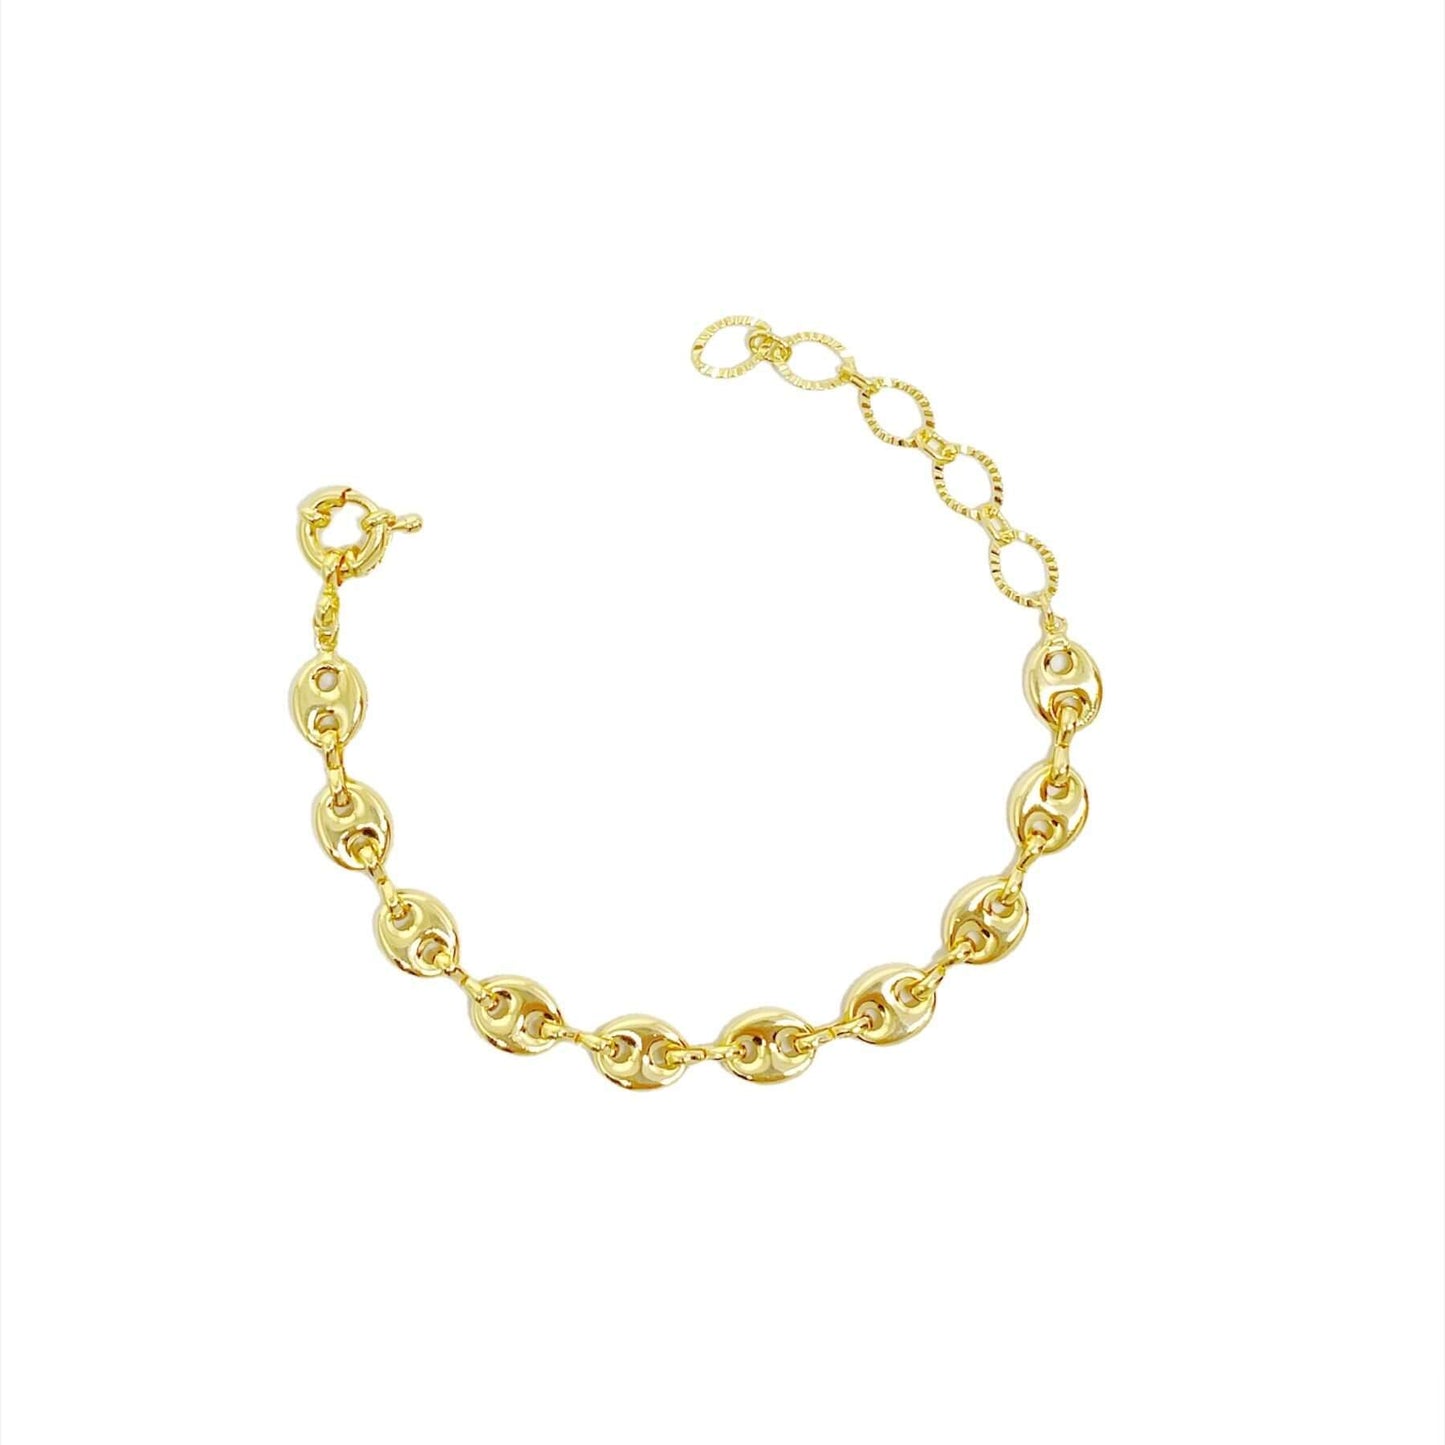 GoldFi 18k Gold Filled Puffy Mariner Bracelet Featuring Unique Chain Extender